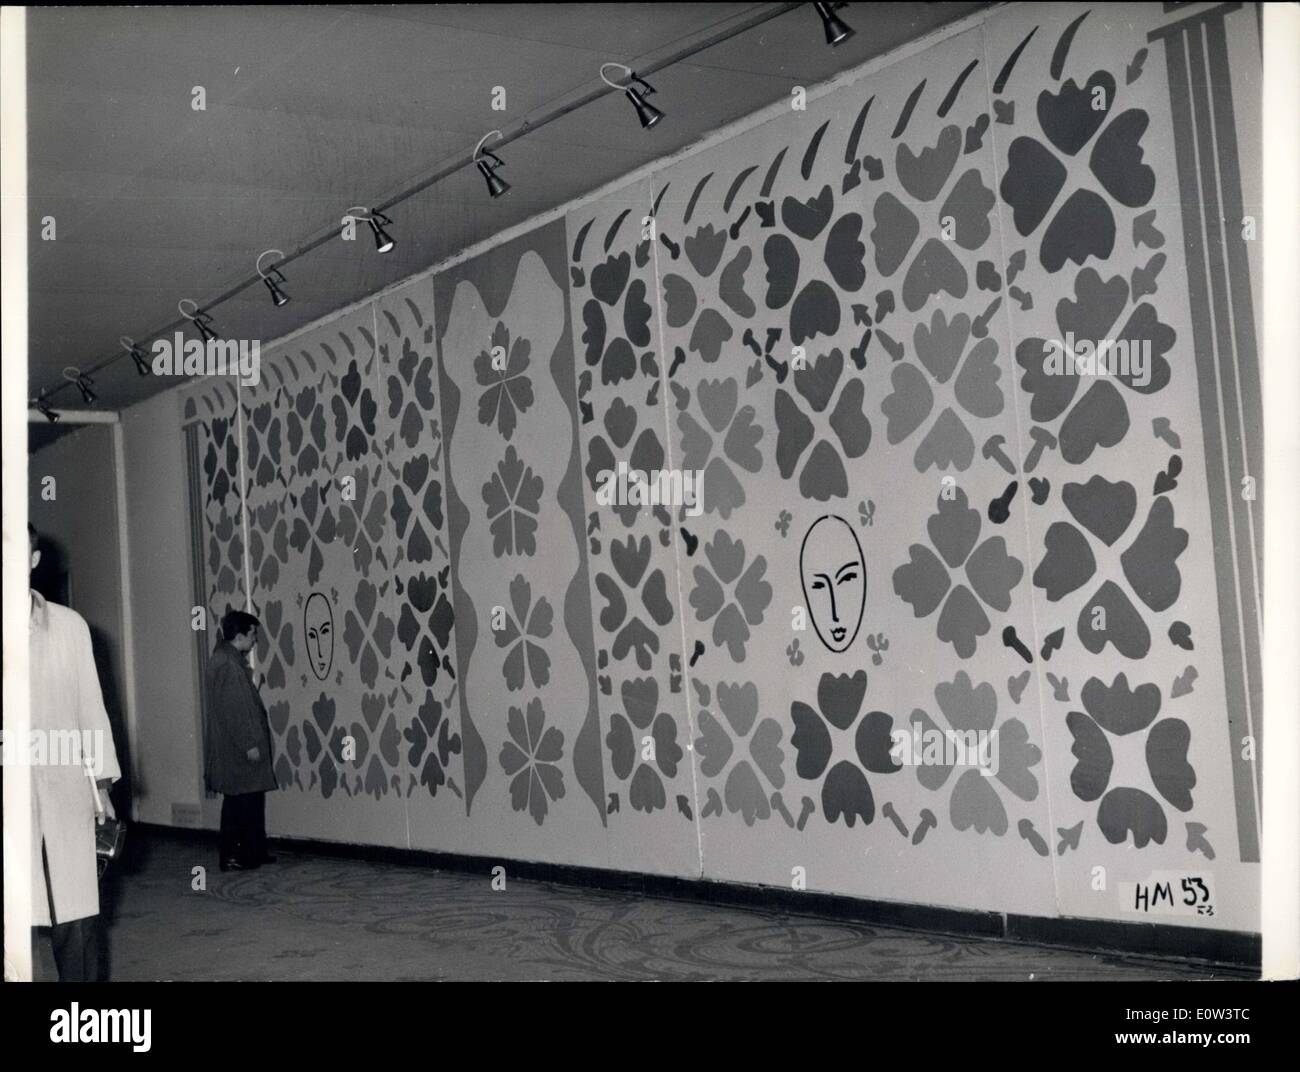 Mar. 22, 1961 - Gouaches By Matisse On Show: A collection of Gouache painted by Henri Matisse, the famous French painter, are now in show in the museum of decorative arts Paris. Photo shows One of the Huge Gouaches painted by Matisse. Stock Photo